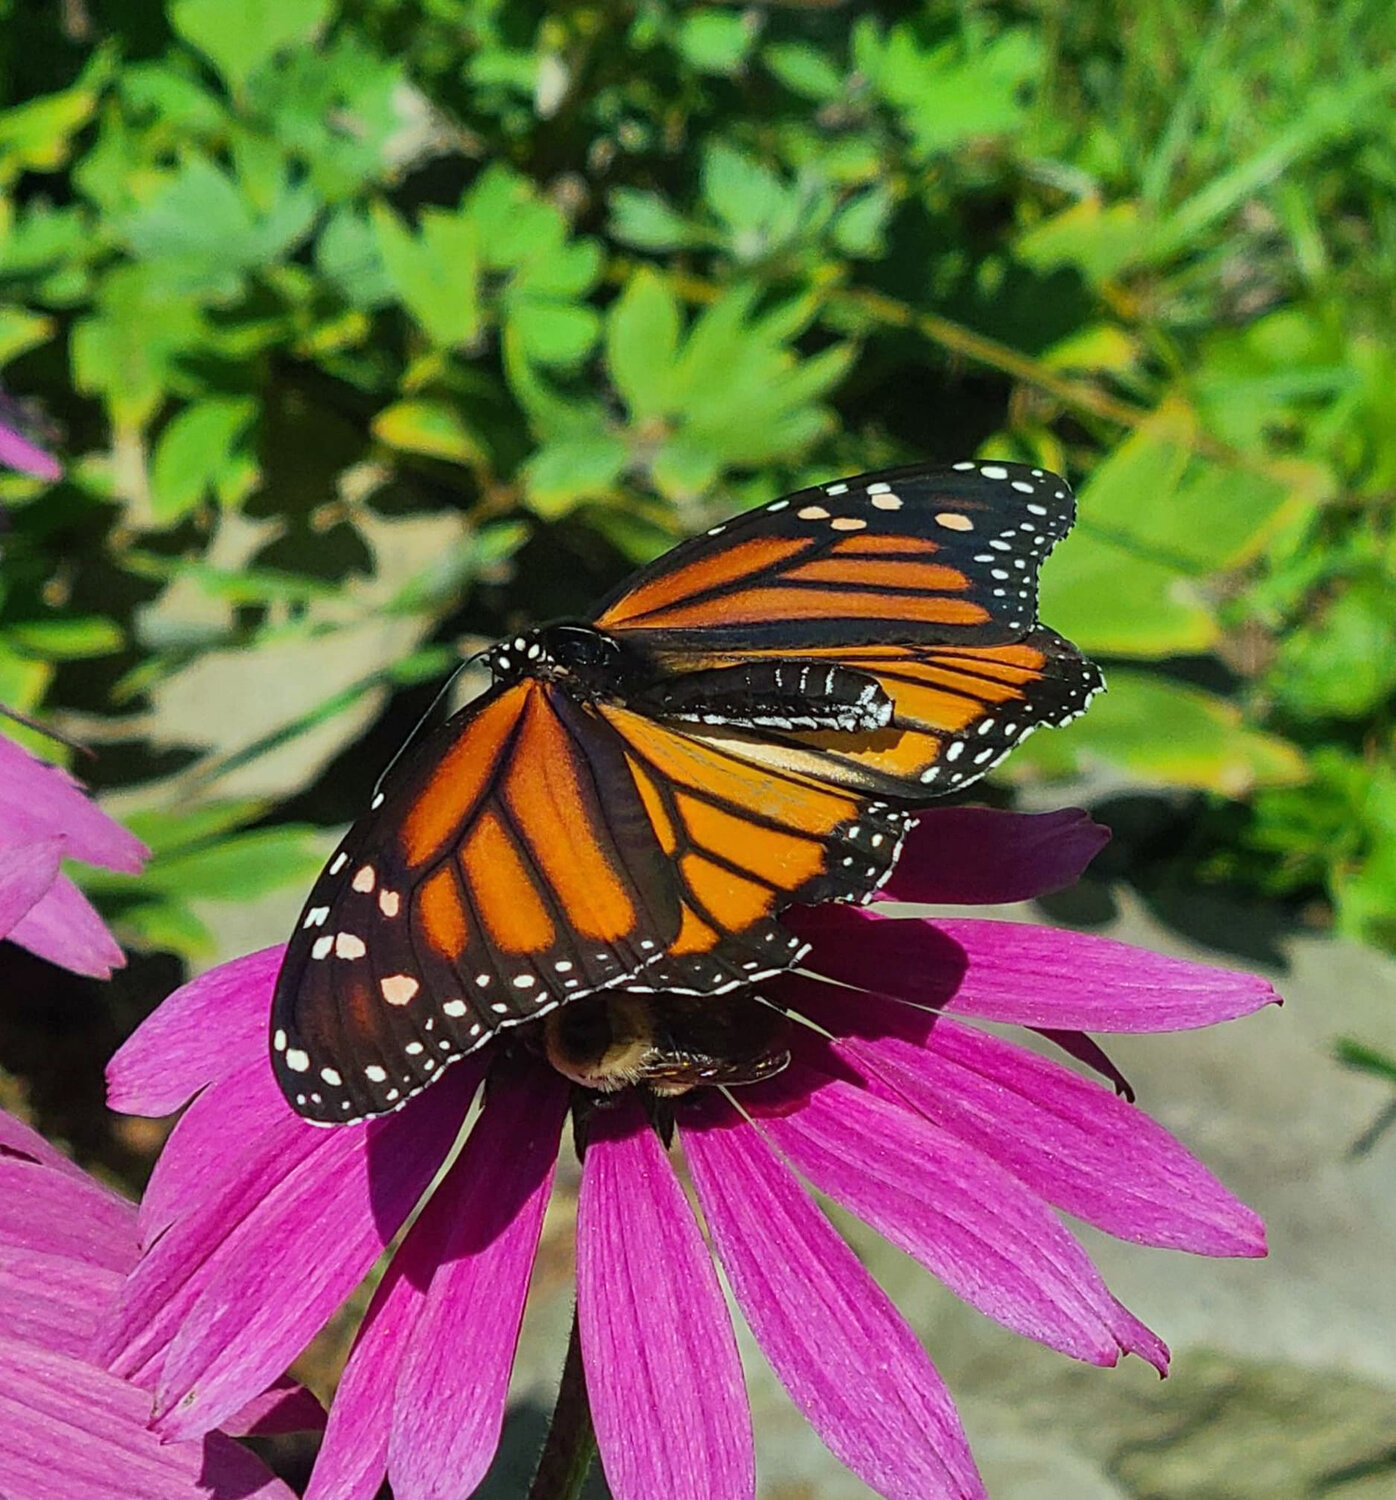 This monarch butterfly is one of many varieties of butterflies seen at GAIT Therapeutic Riding Center’s garden in Milford Township over the course of the summer. If you move slowly, you can get pretty close to butterflies and get a good shot. Phone cameras have a reasonable depth of field and do well with close or macro shots...